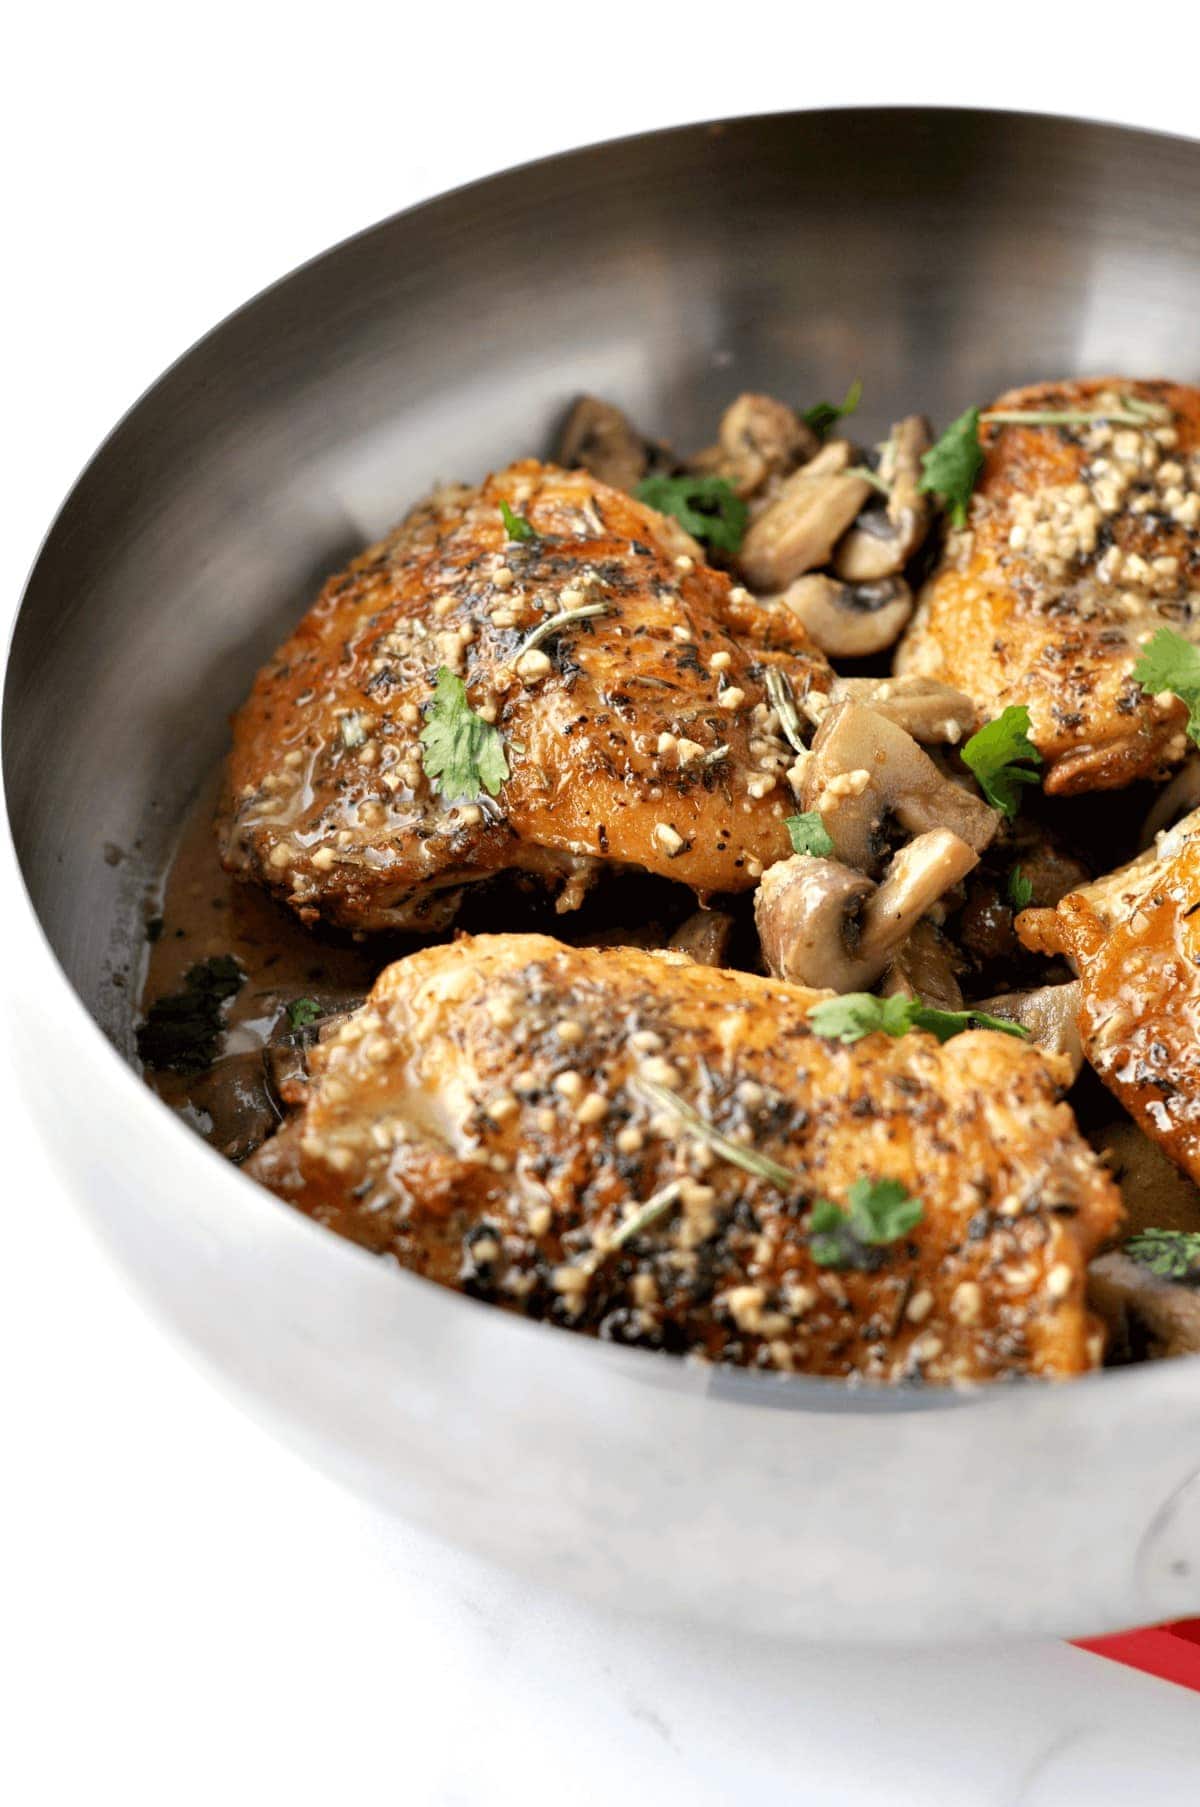 A skillet full of crispy chicken thighs, topped with a mushroom herb sauce and garnished with parsley